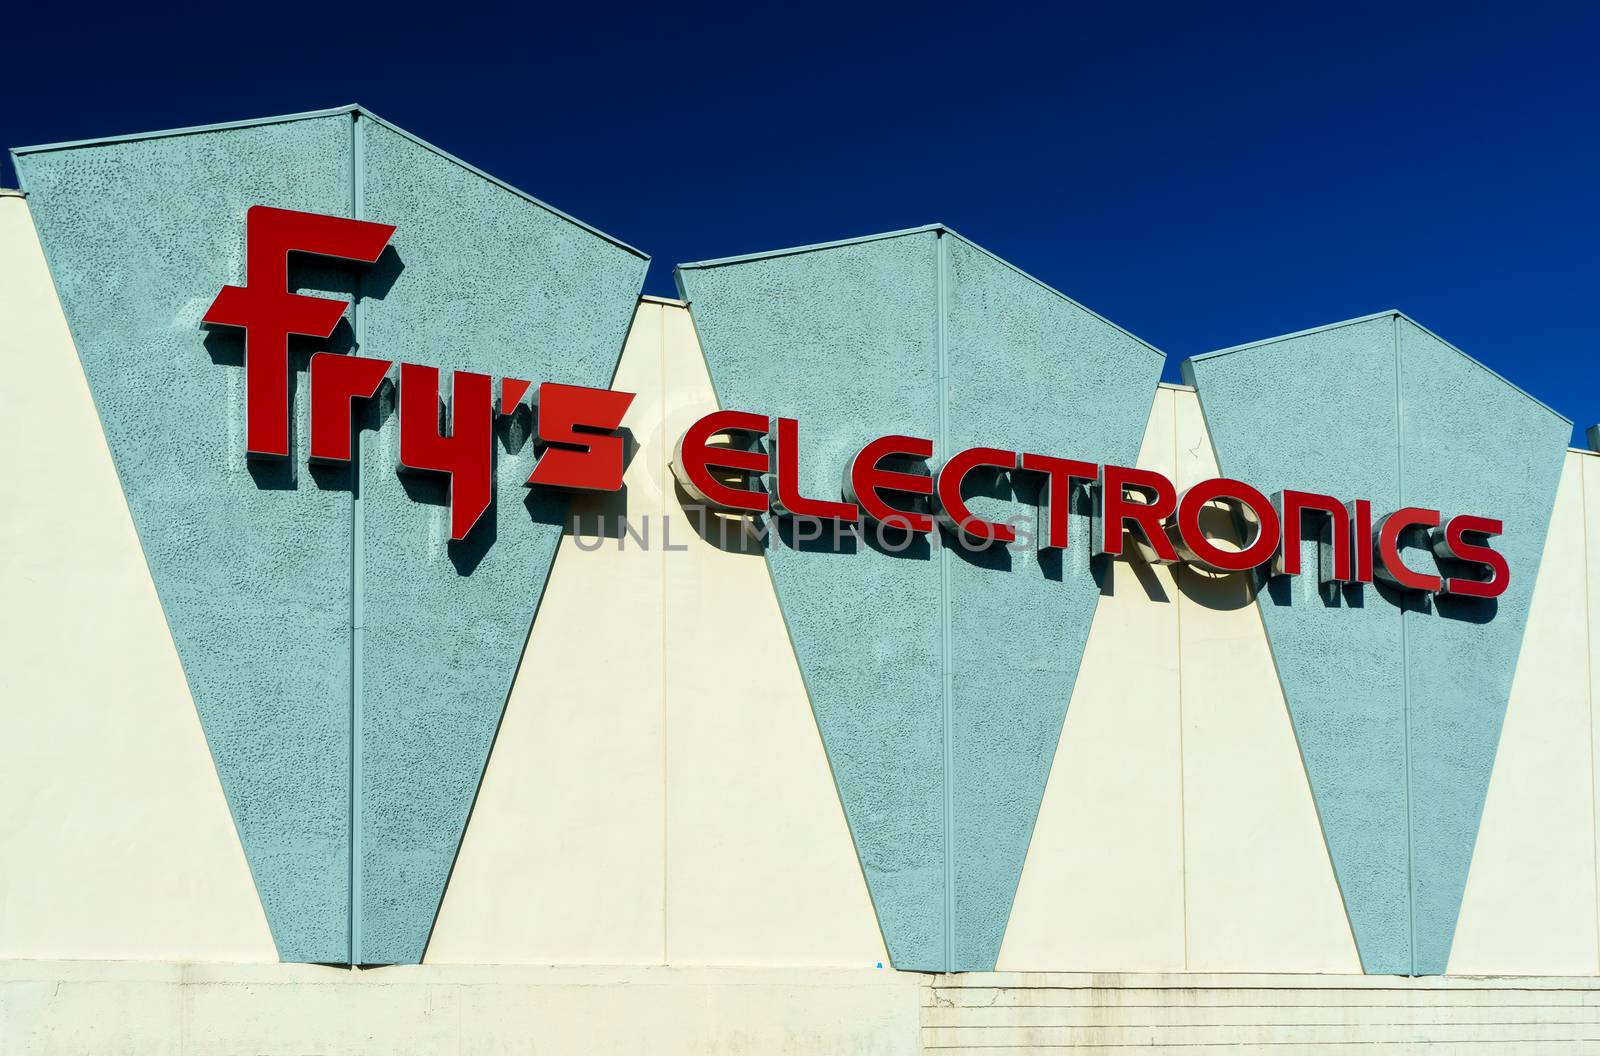 BURBANK, CA/USA - SEPTEMBER 19, 2015: Fry's Electronics store exterior. Fry's is a big-box store retailer of software, consumer electronics, household appliances and computer hardware.